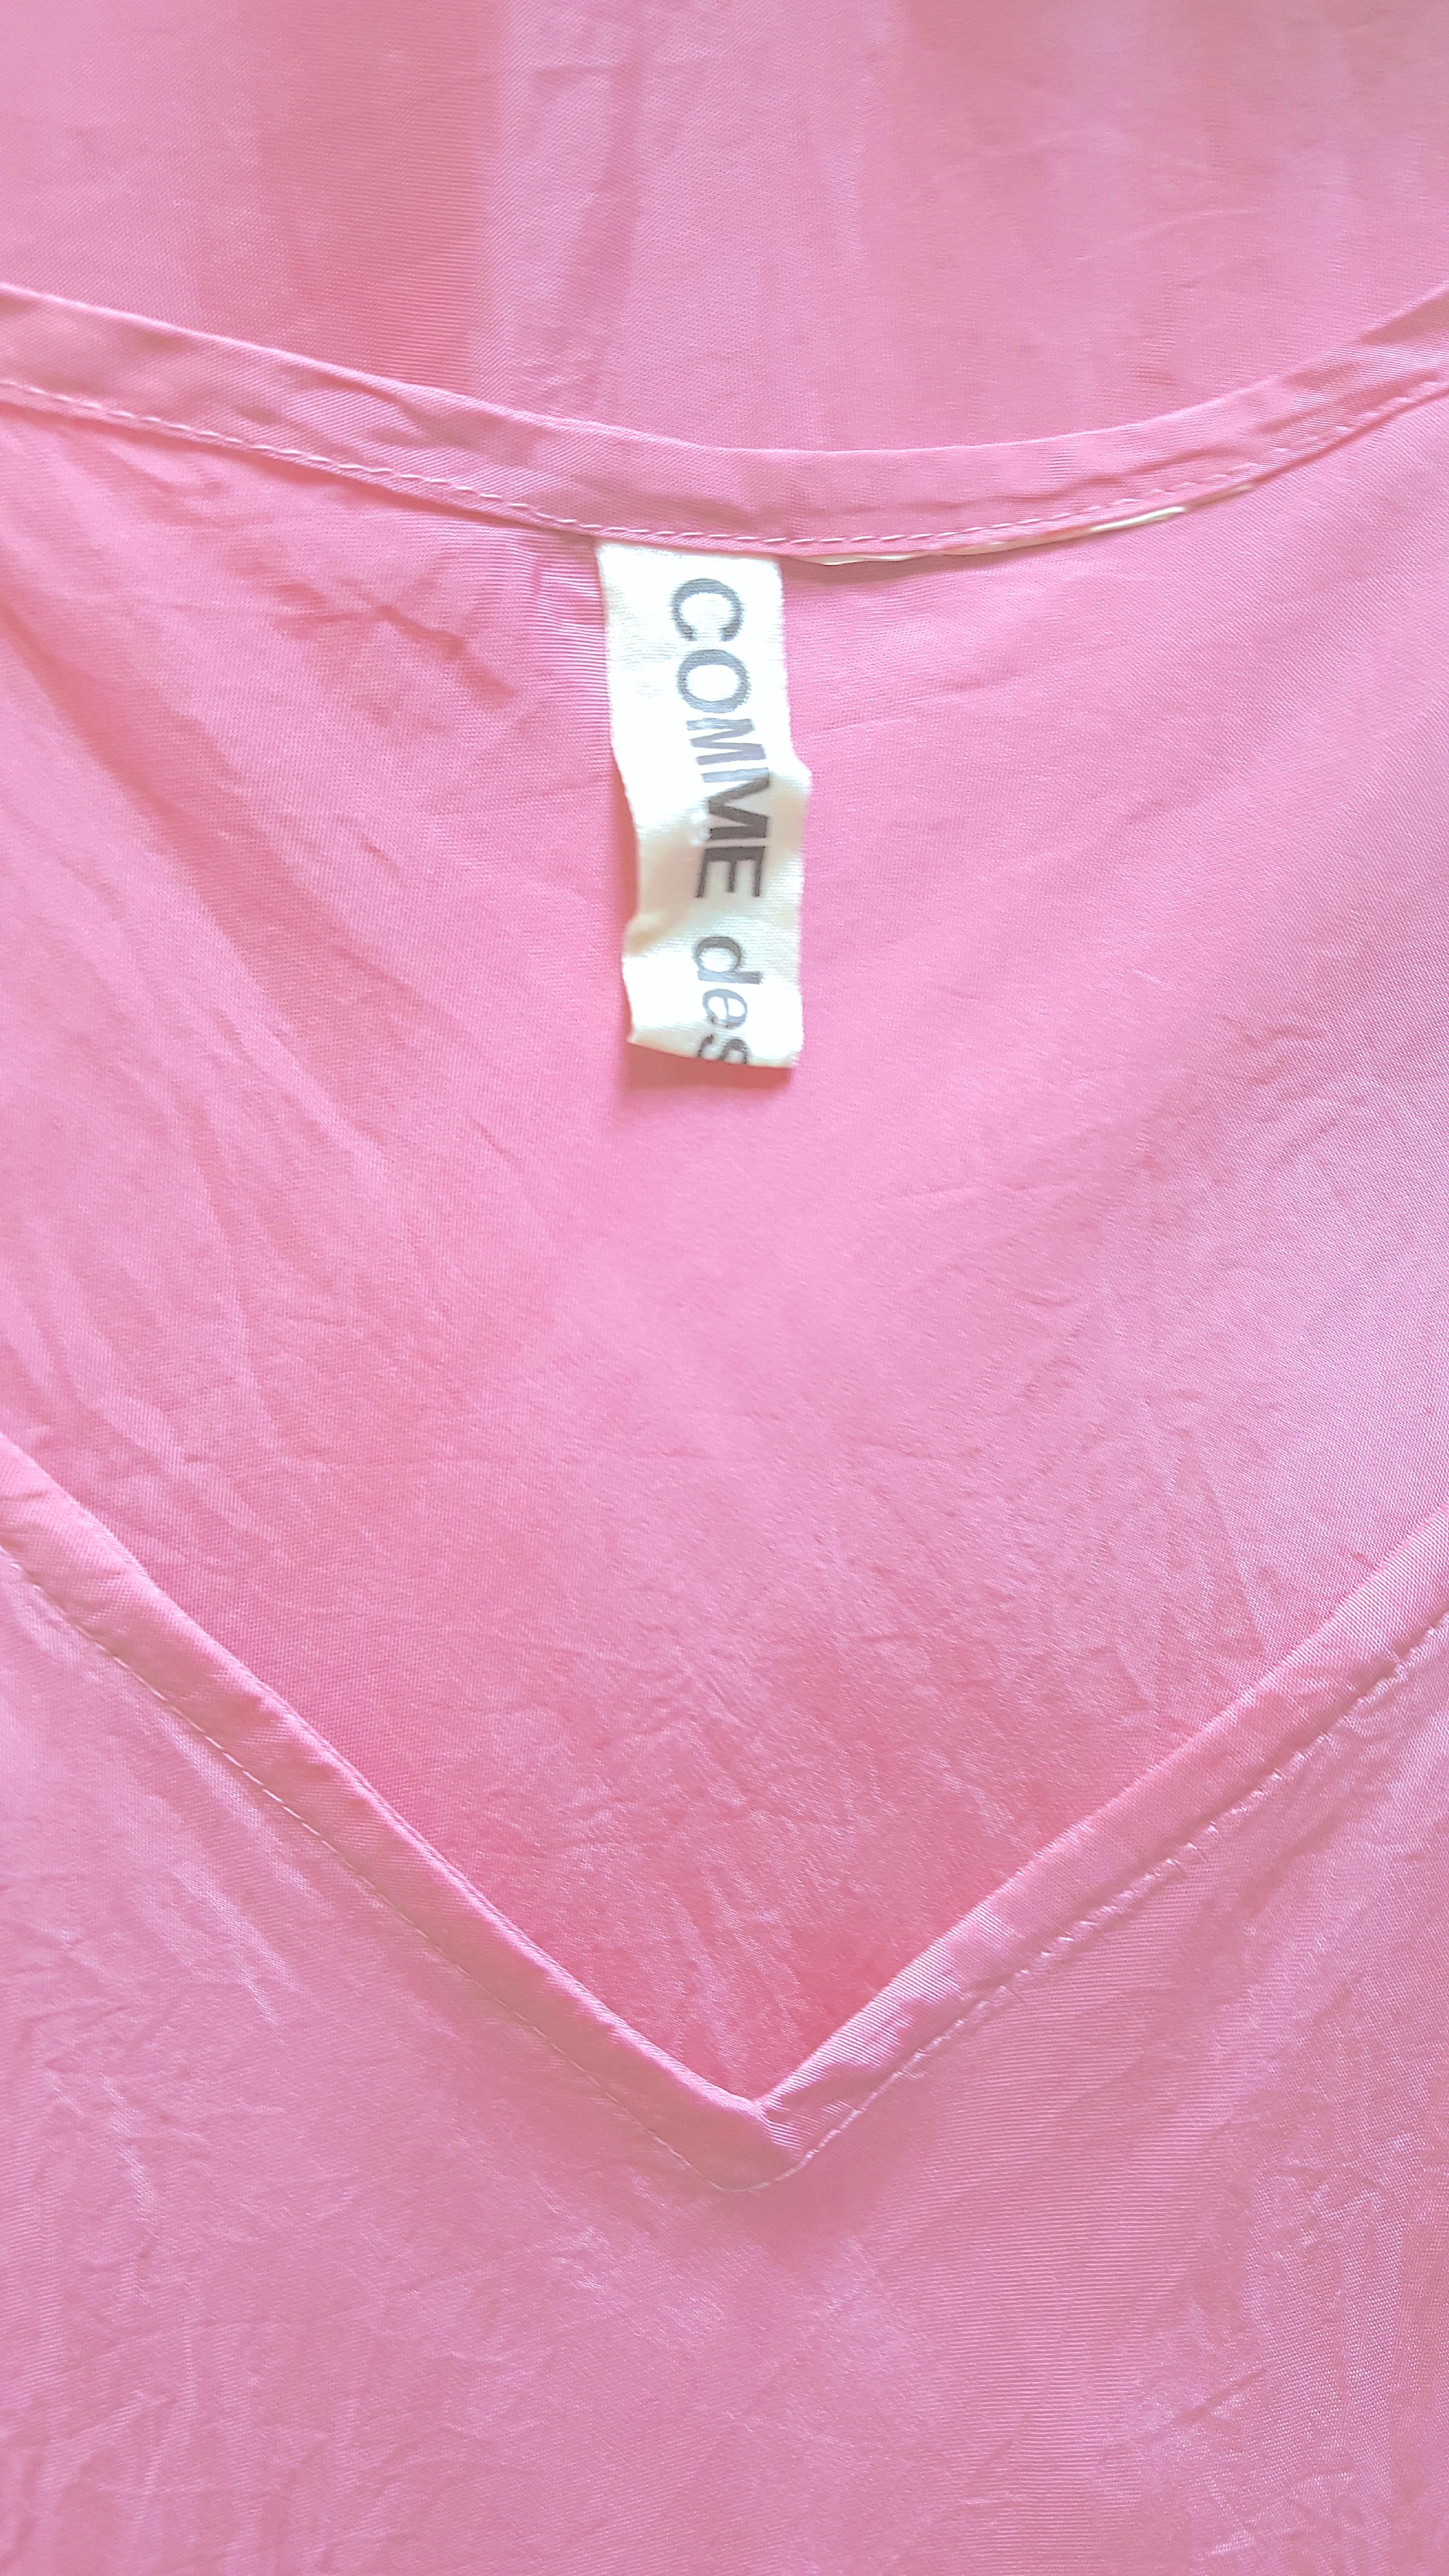 CommeDesGarcons 1999 RunwayLook12 BiasCut TranslucentSatin SalmonPink MaxiDress In Excellent Condition For Sale In Chicago, IL